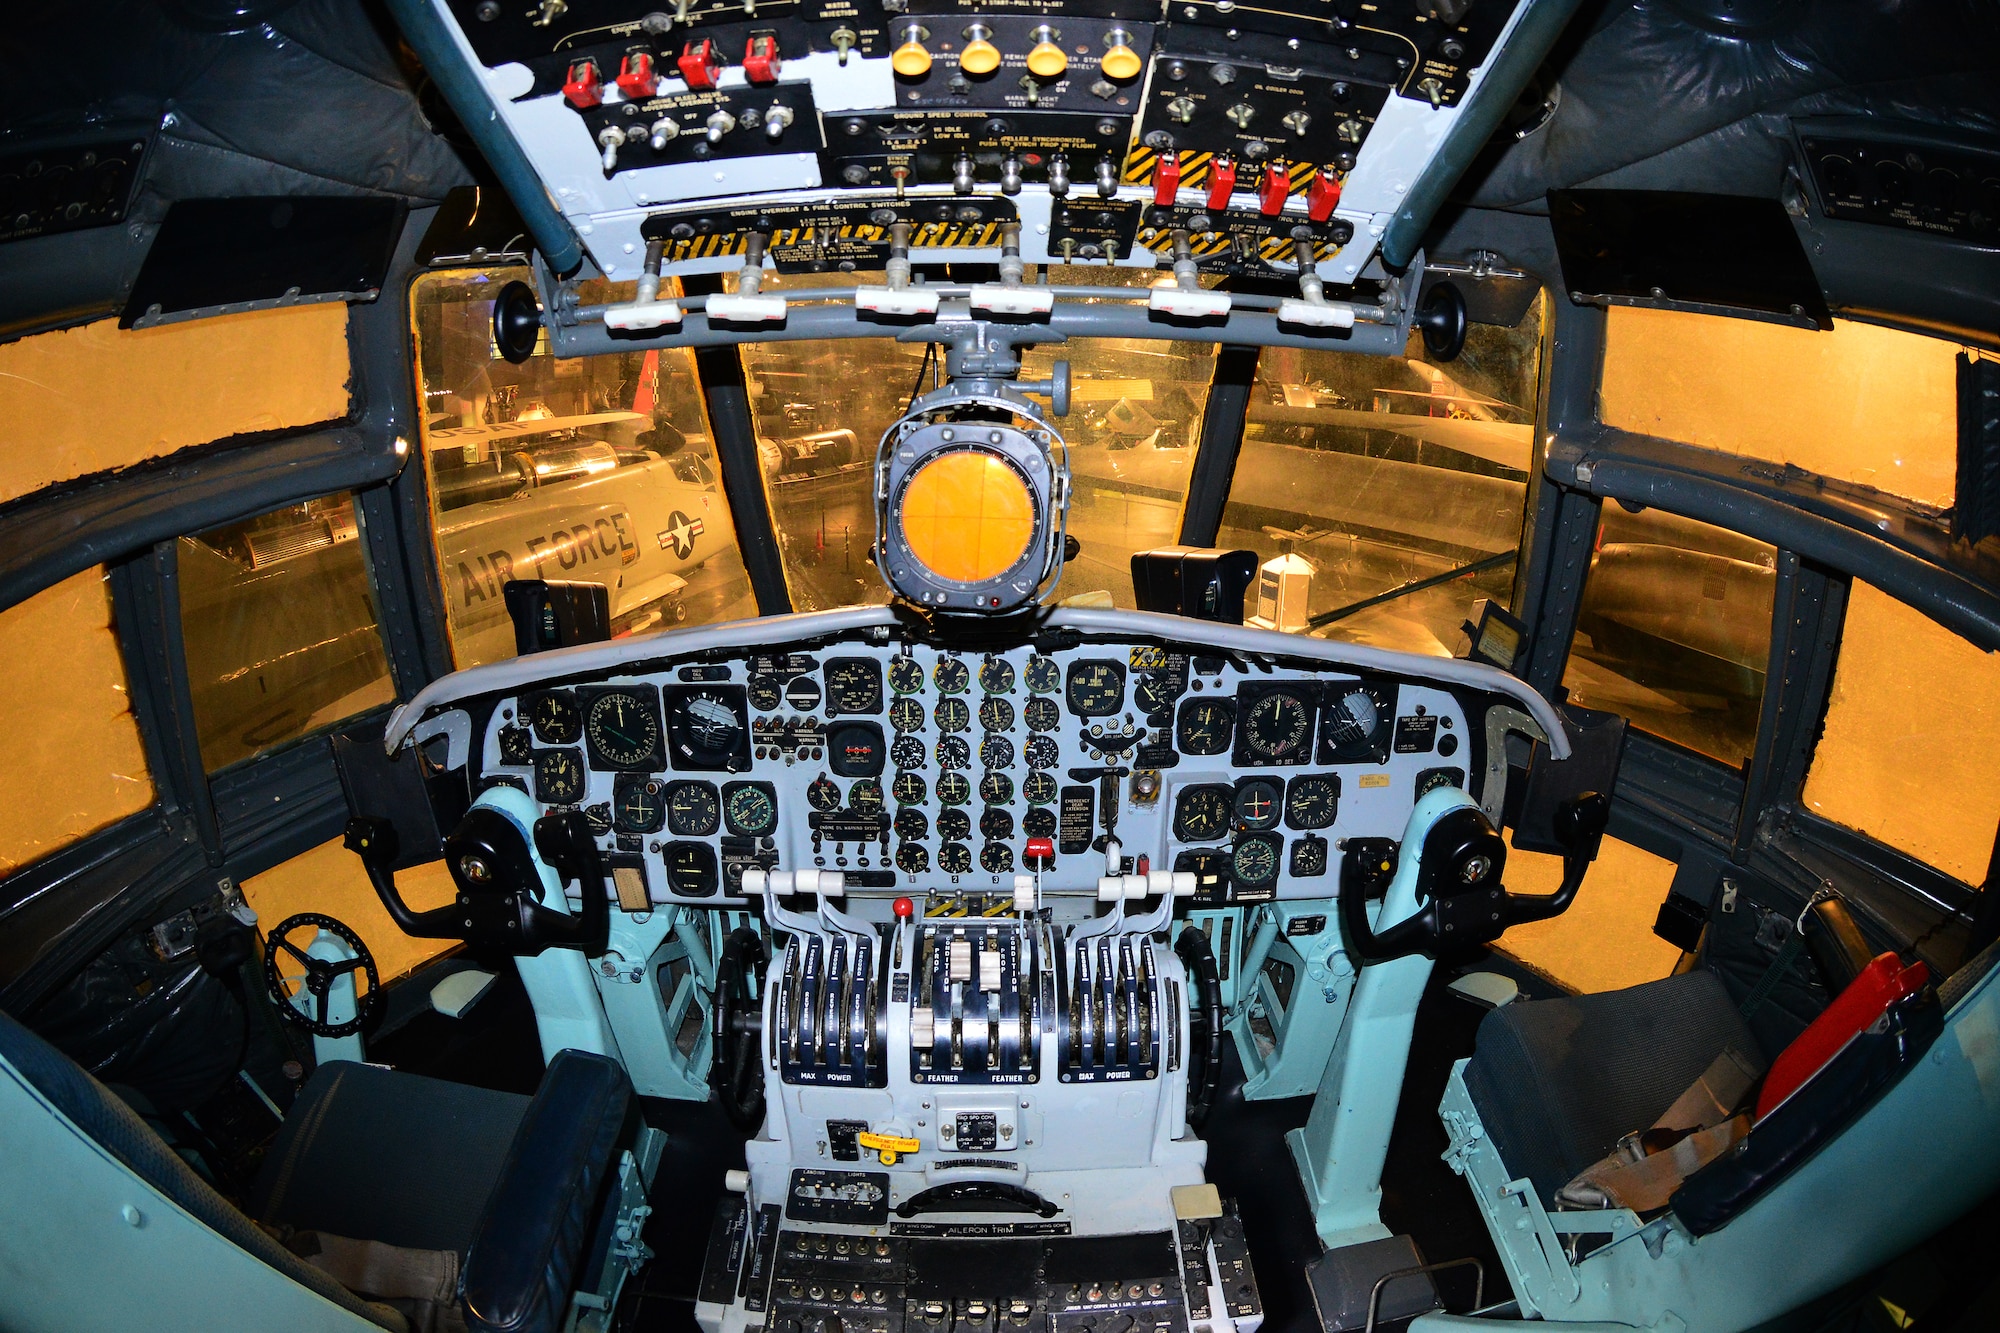 DAYTON, Ohio -- Douglas C-133A Cargomaster cockpit in the Cold War Gallery at the National Museum of the United States Air Force. (U.S. Air Force photo by Ken LaRock)